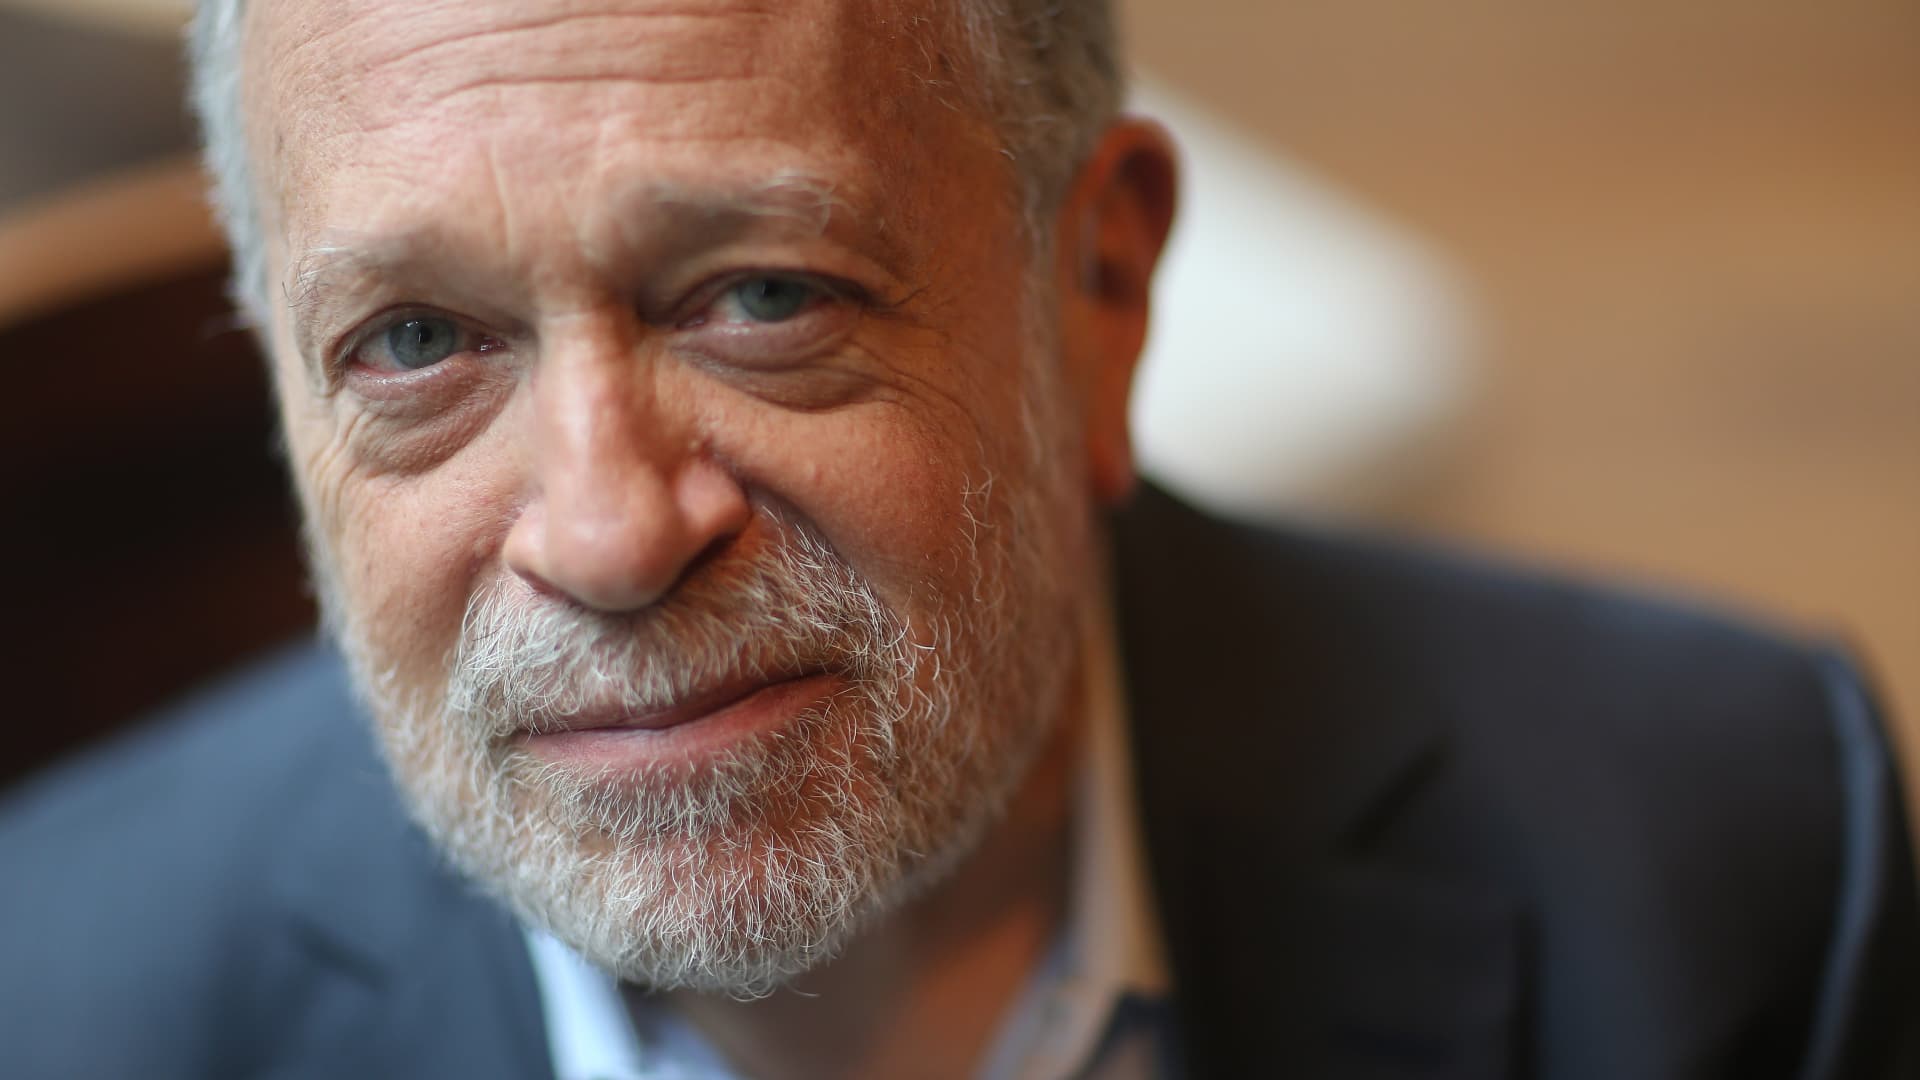 Why artificial intelligence may become your employer: Robert Reich